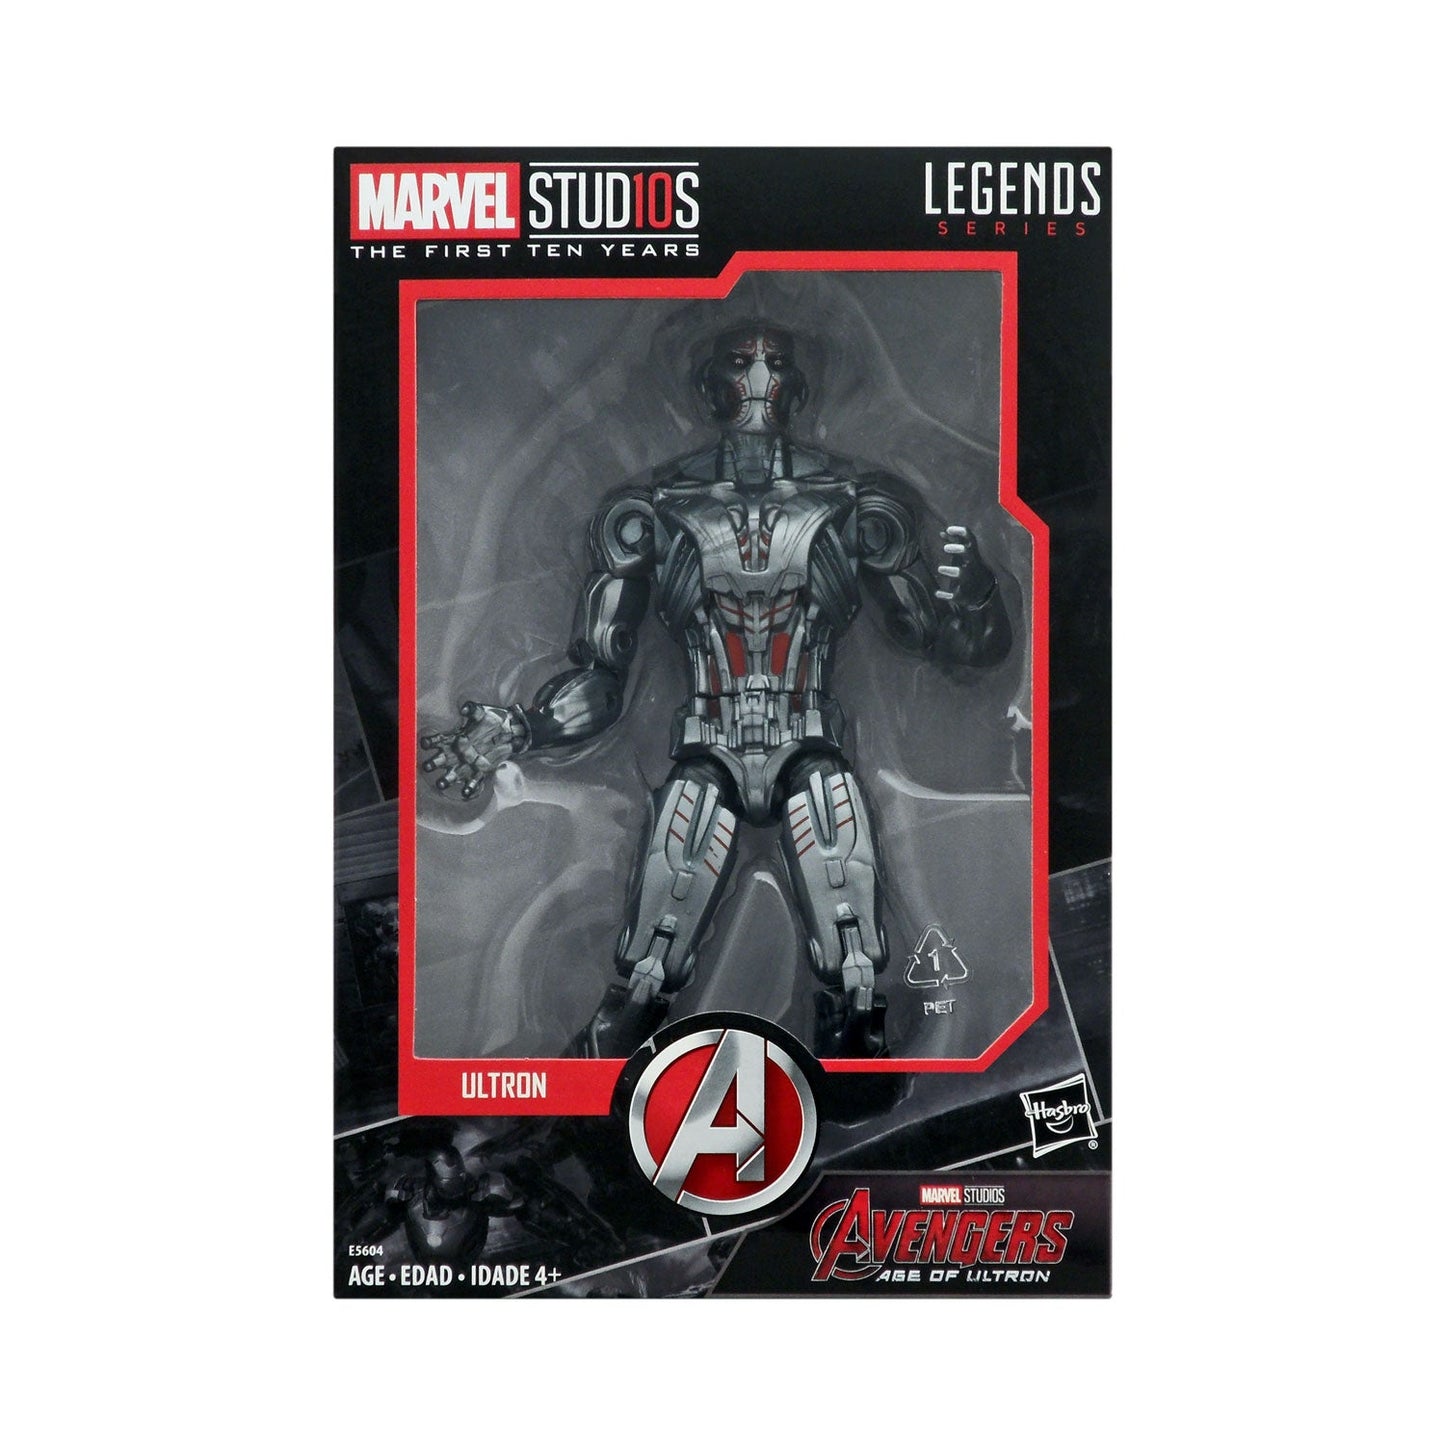 Marvel Studios: The First Ten Years Ultron Prime 6-Inch Action Figure from Avengers: Age of Ultron